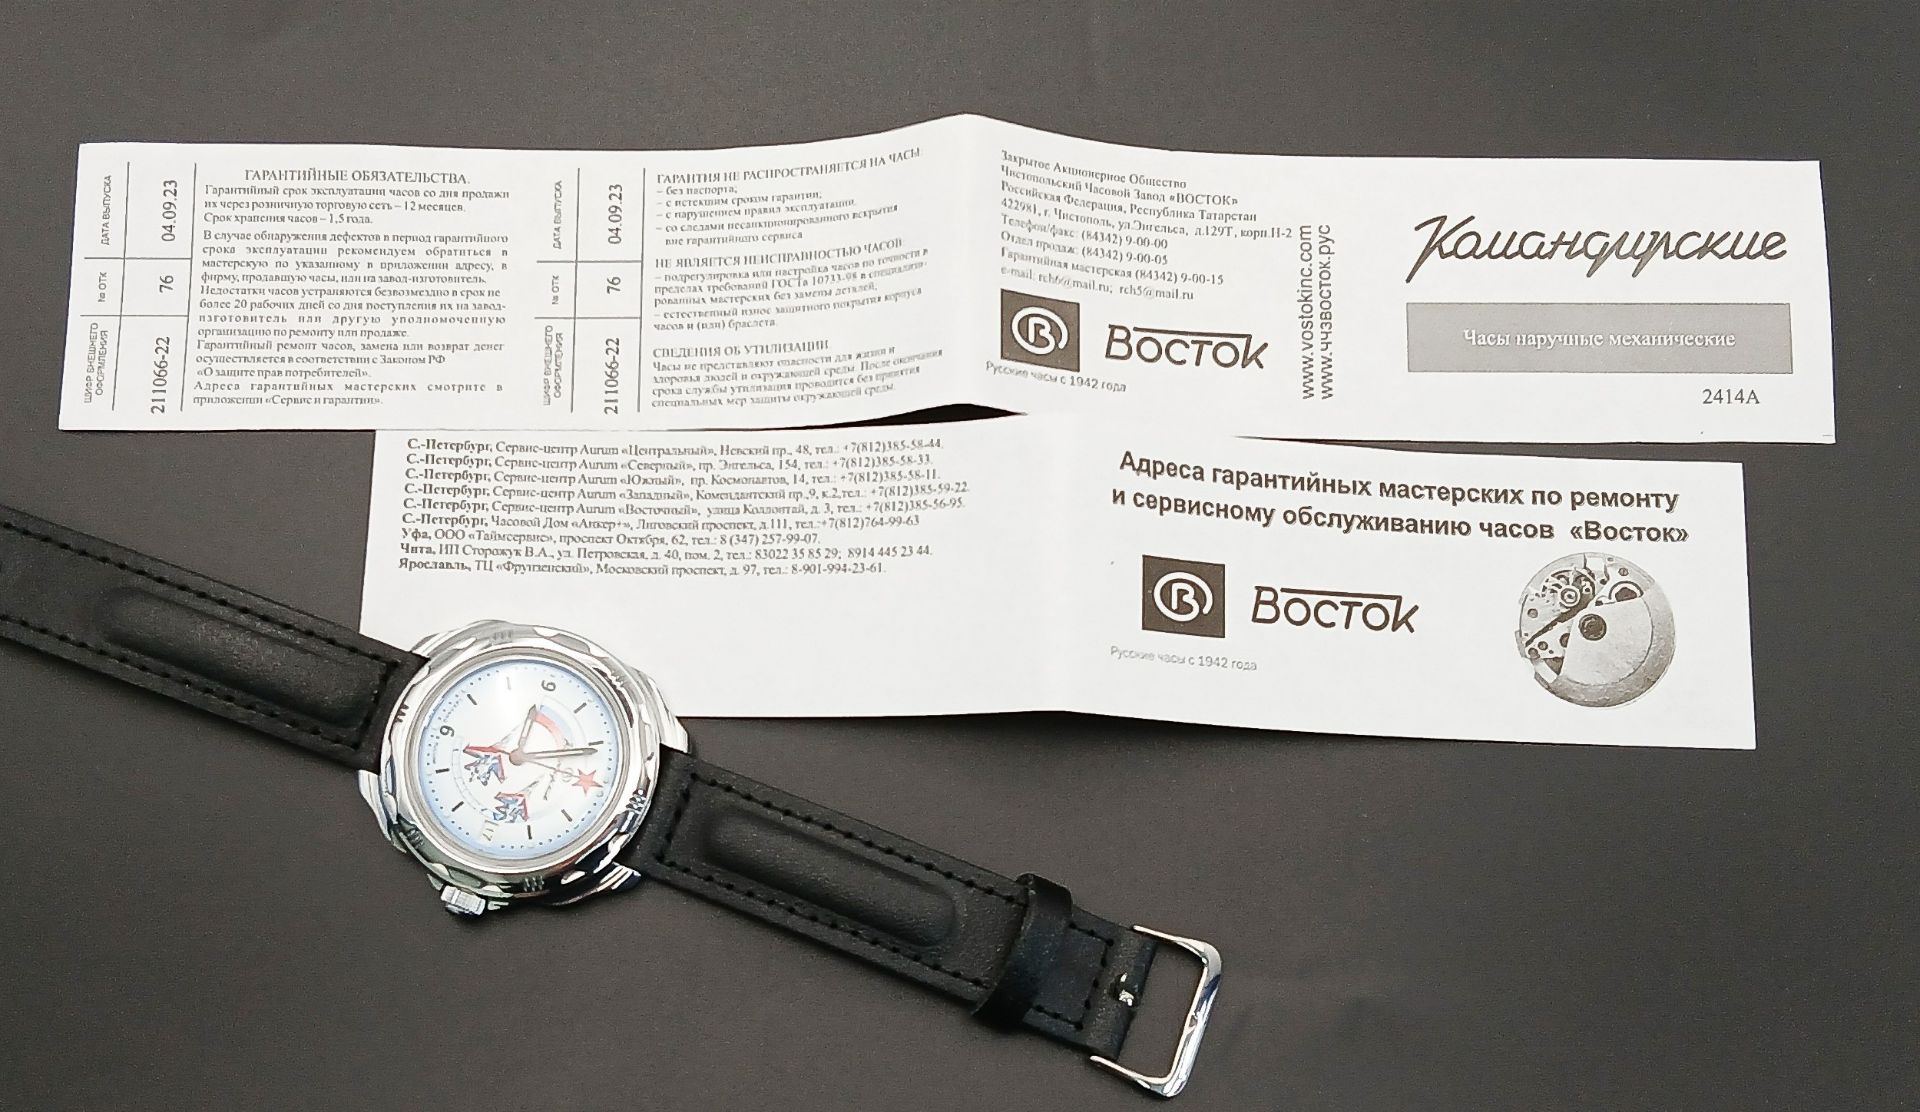 A Vostok Manual Gents Watch. Black leather strap. Stainless steel case - 40mm. White dial with date - Image 5 of 7